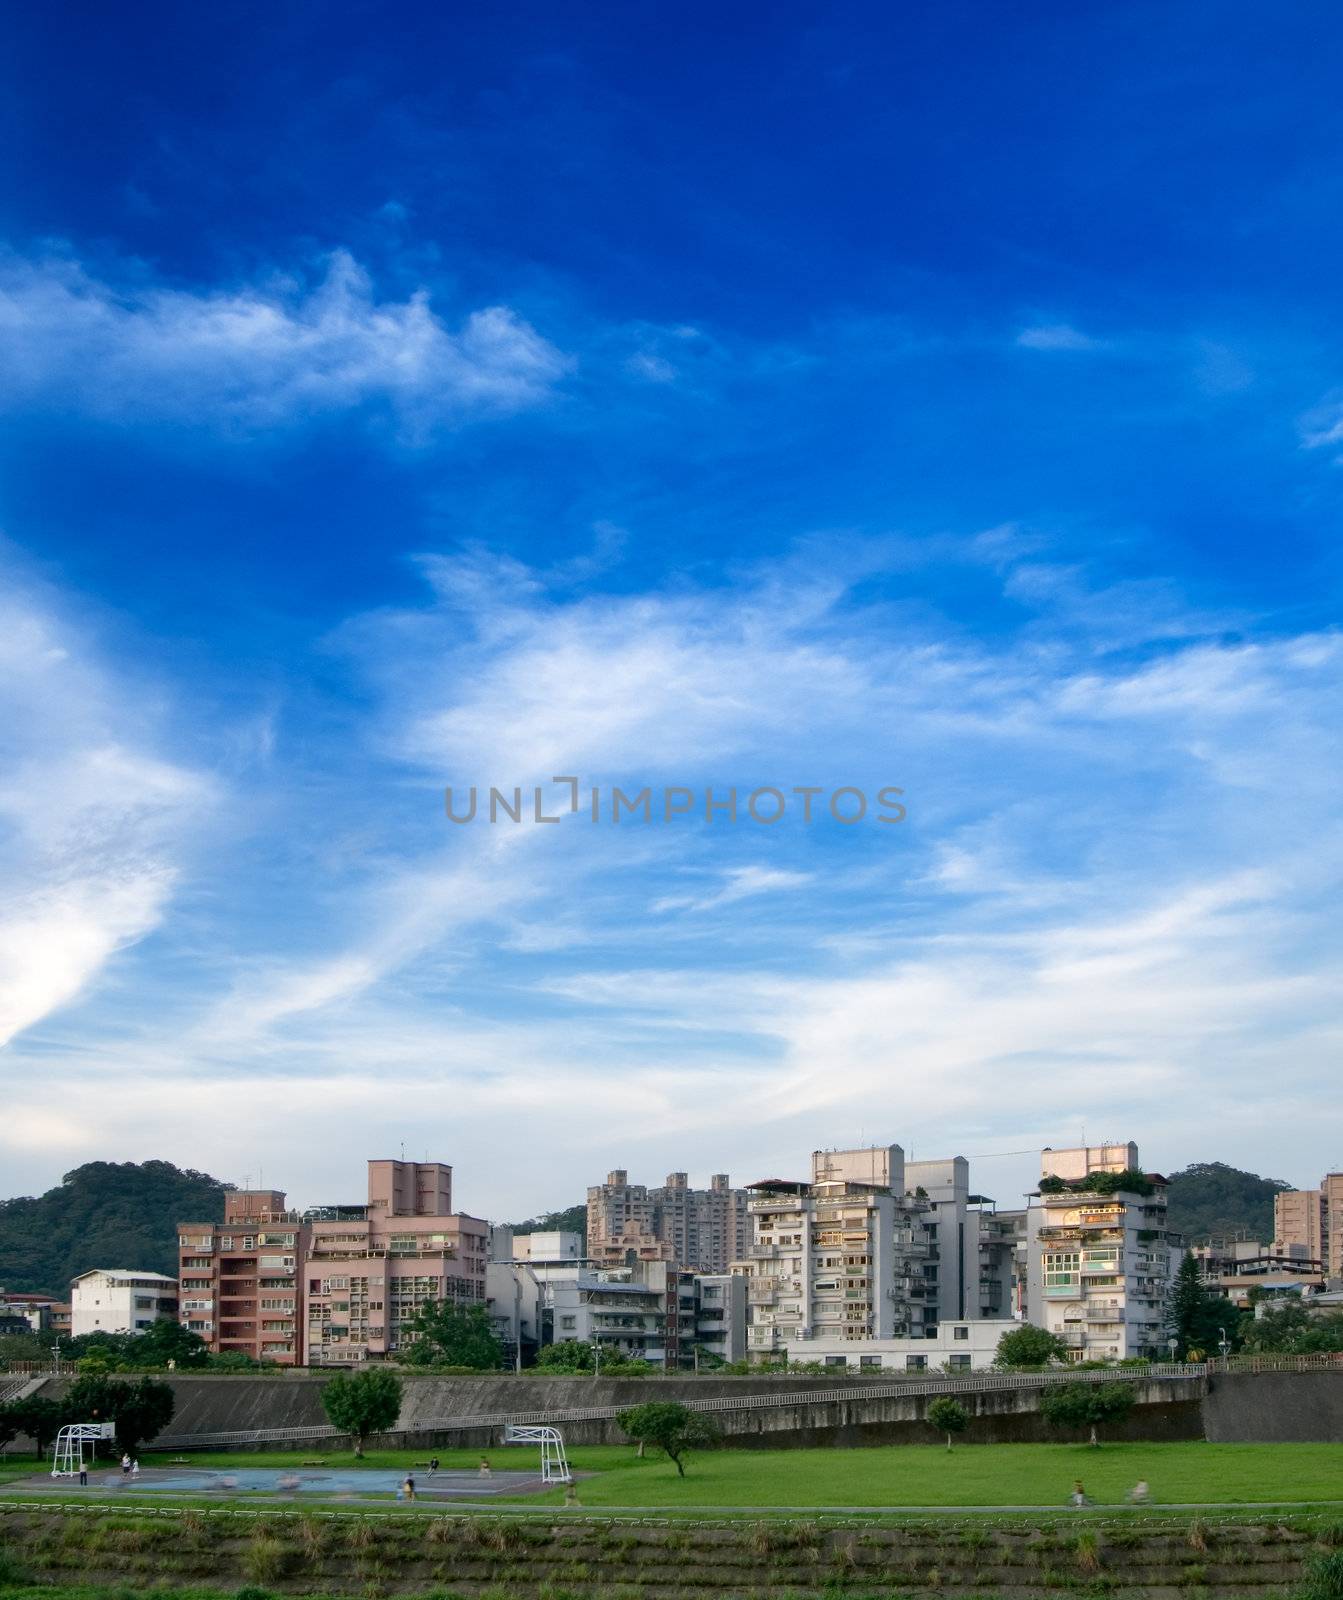 Here is a cityscape of apartment with blue sky.